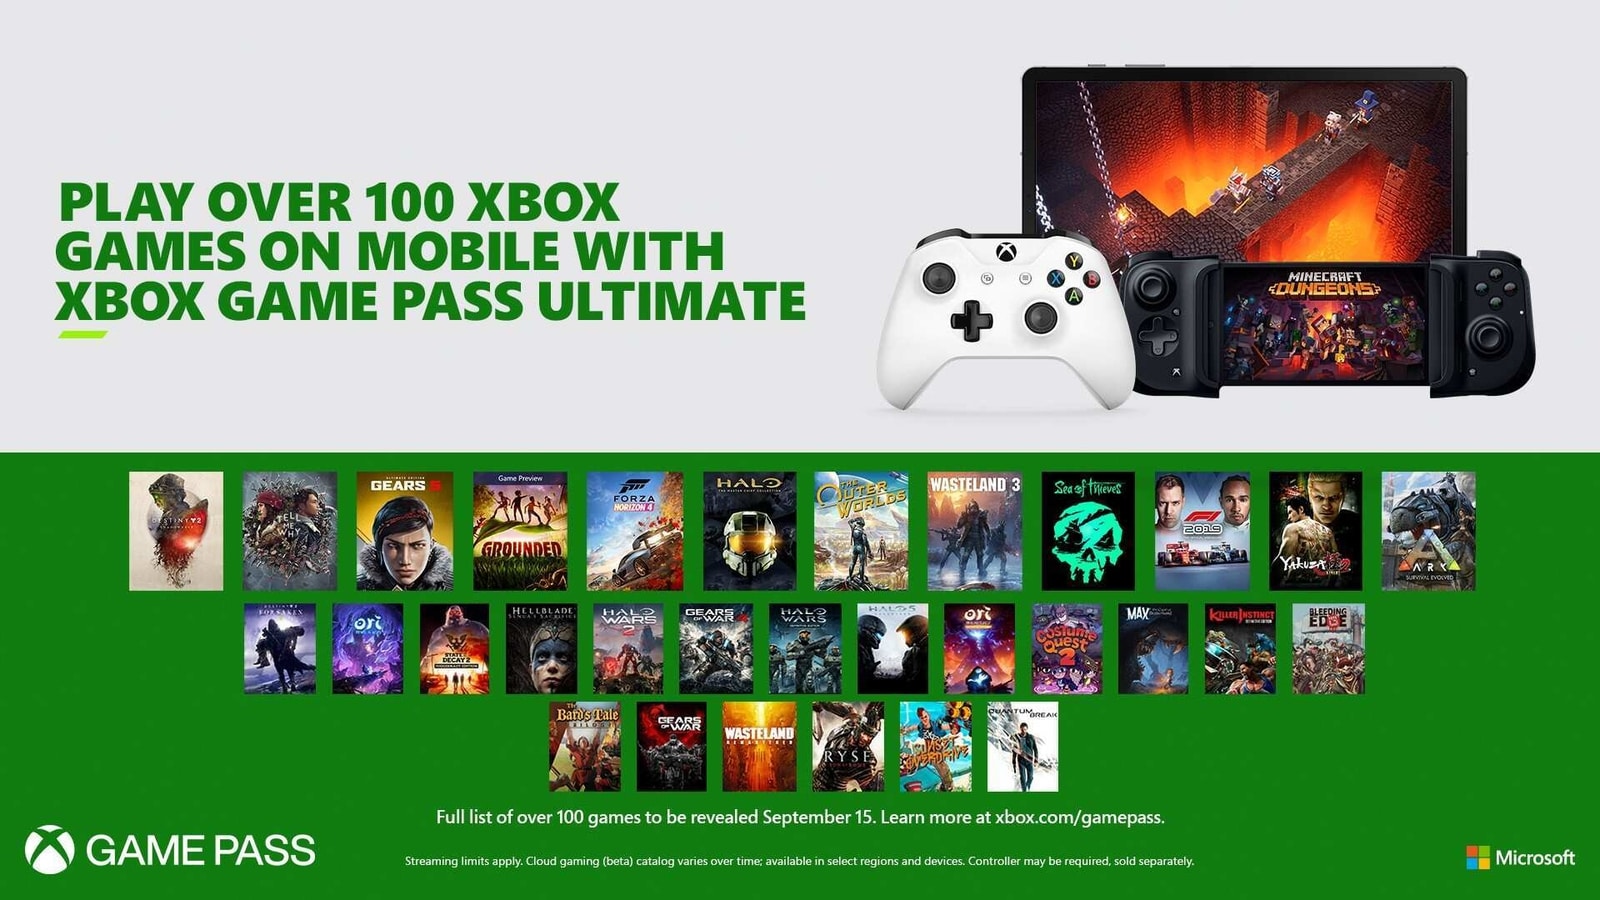 Xbox Game Pass explained: What is it? How much does it cost? What do